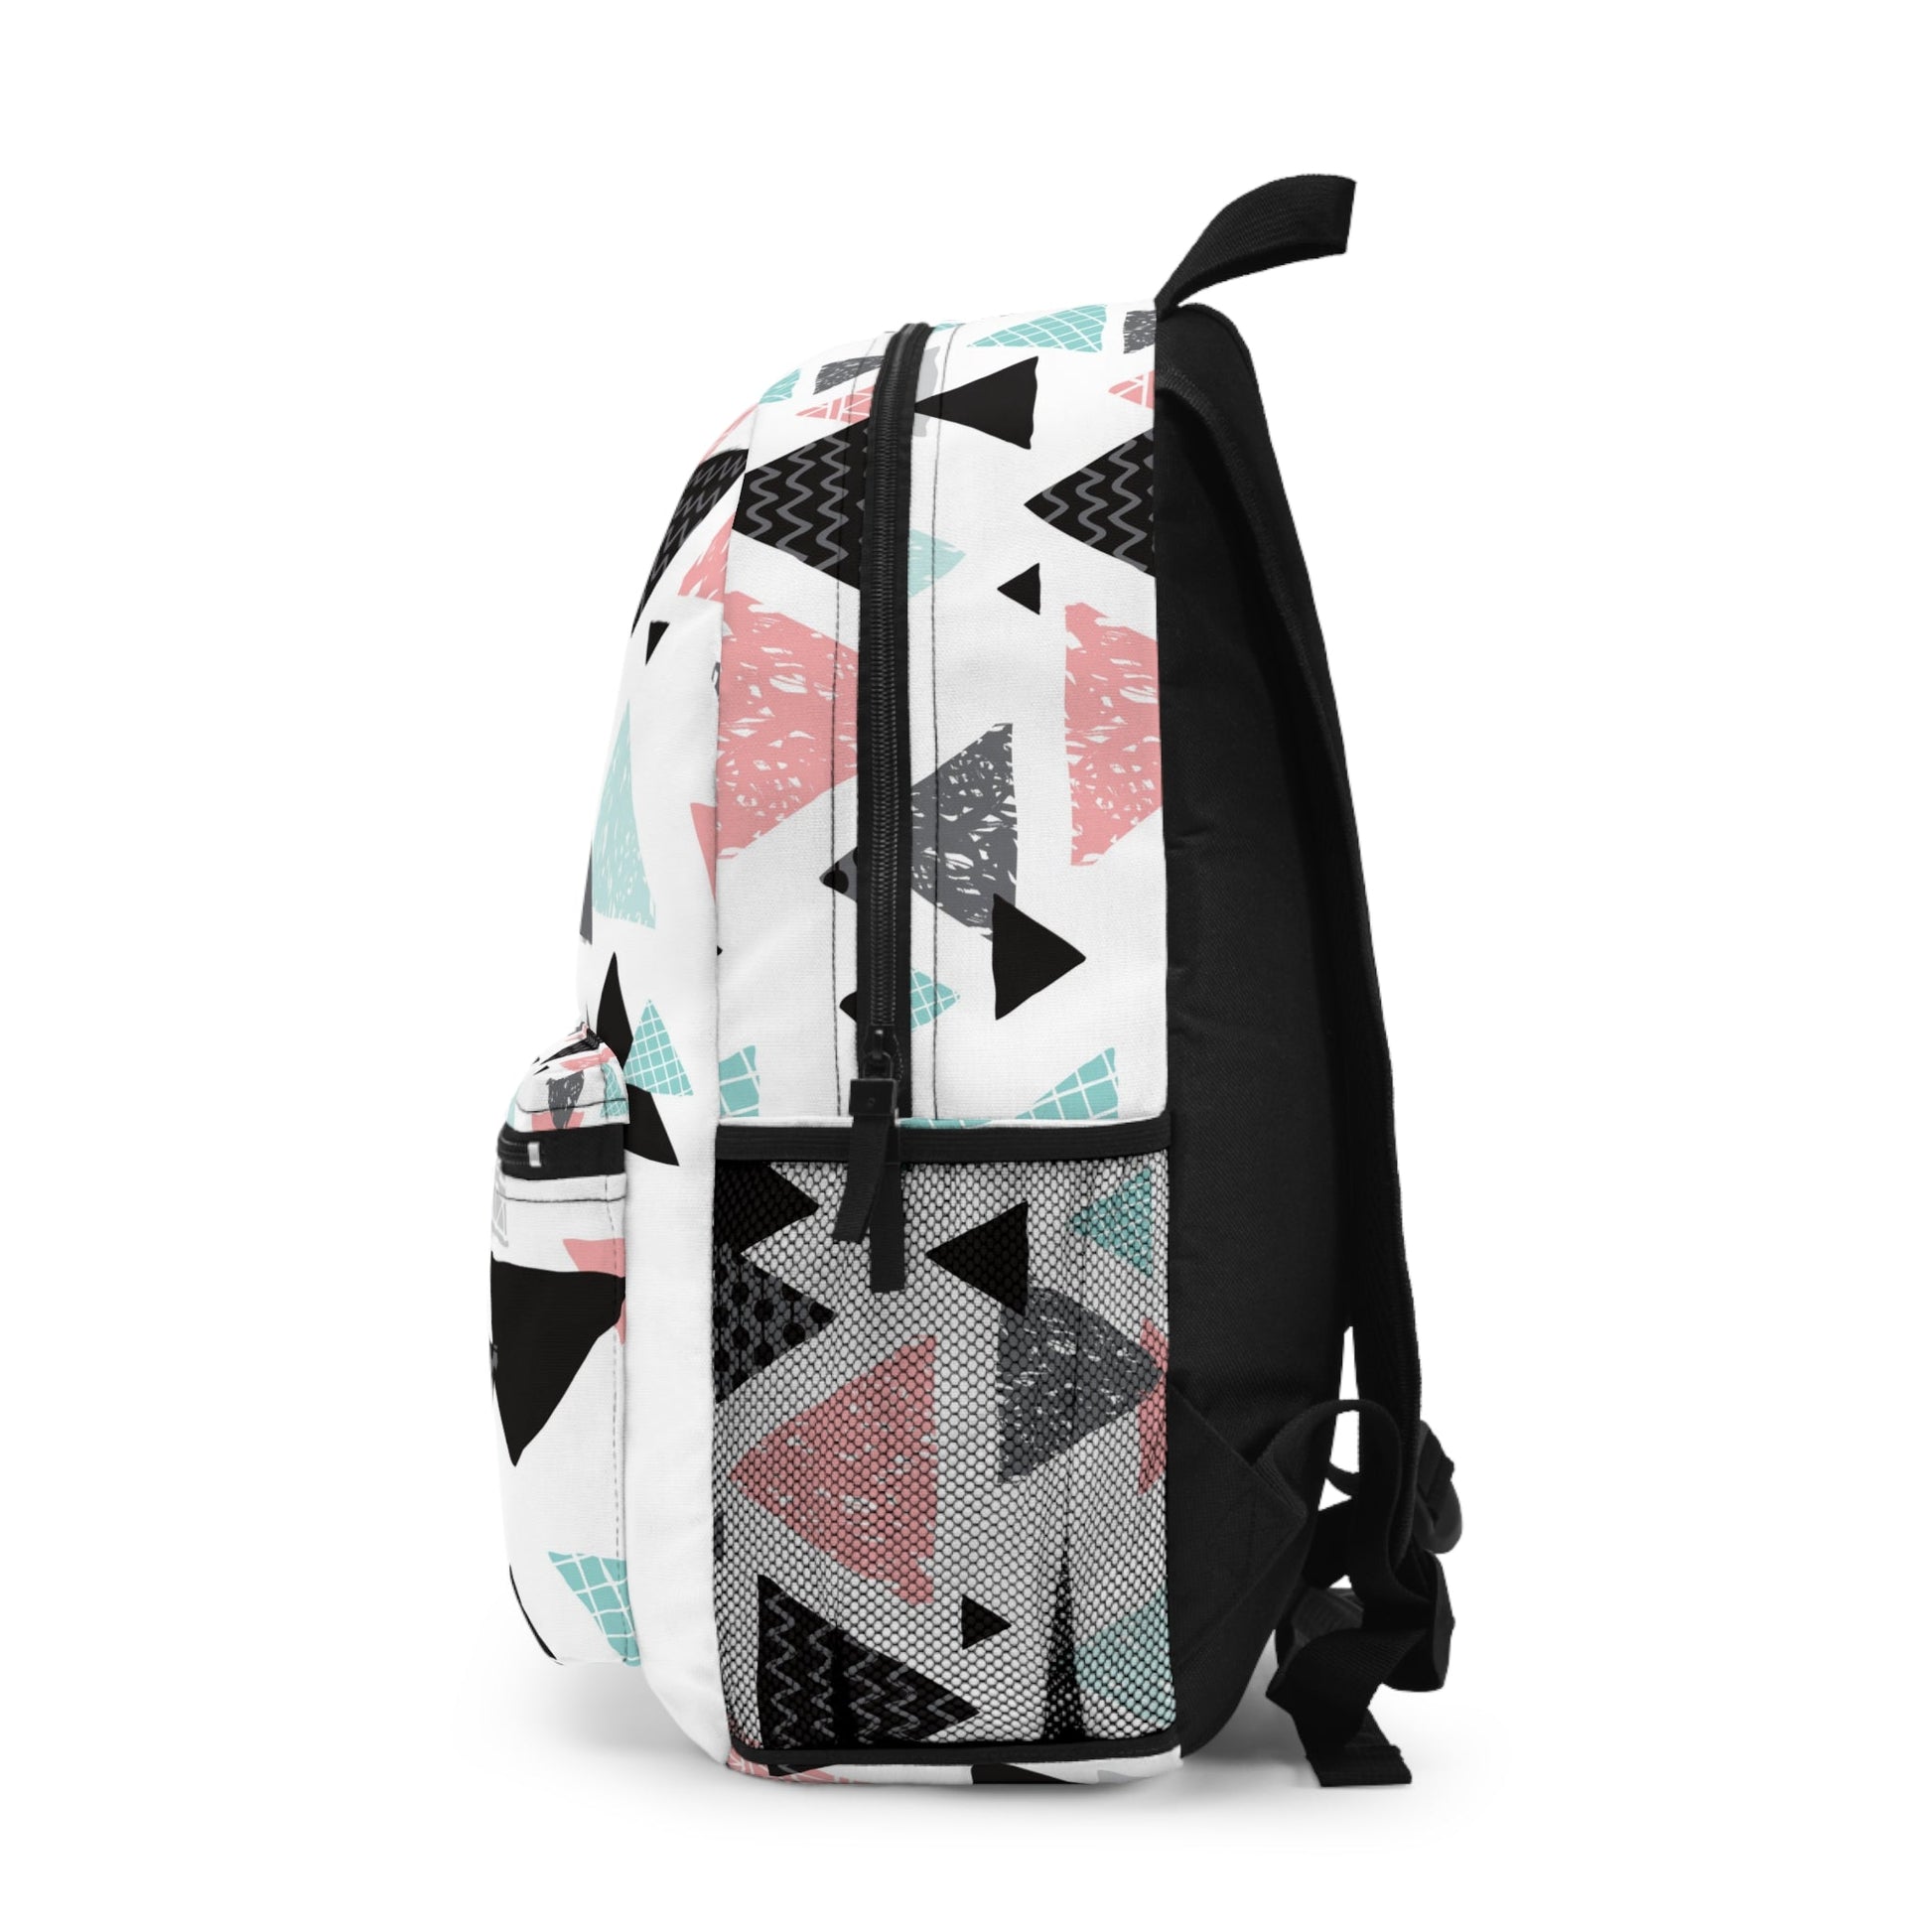 Bags - Triangles Design Backpack